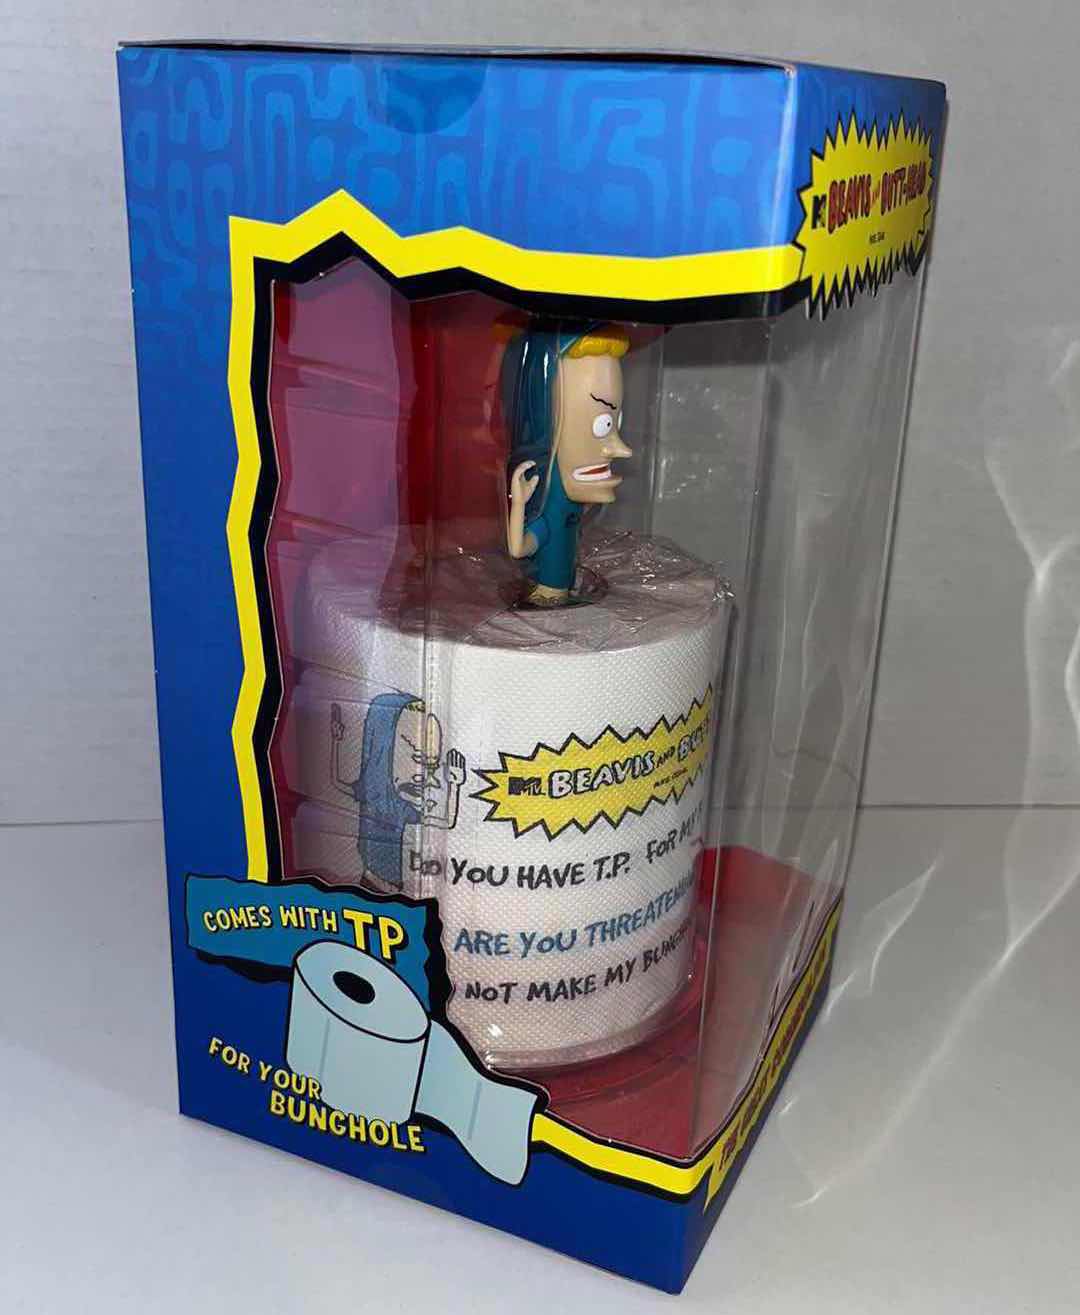 Photo 2 of NEW SUPER7 MTV BEAVIS AND BUTTHEAD “THE GREAT CORNHOLIO” FIGURE & TOILET PAPER ROLL $36.00 (1)